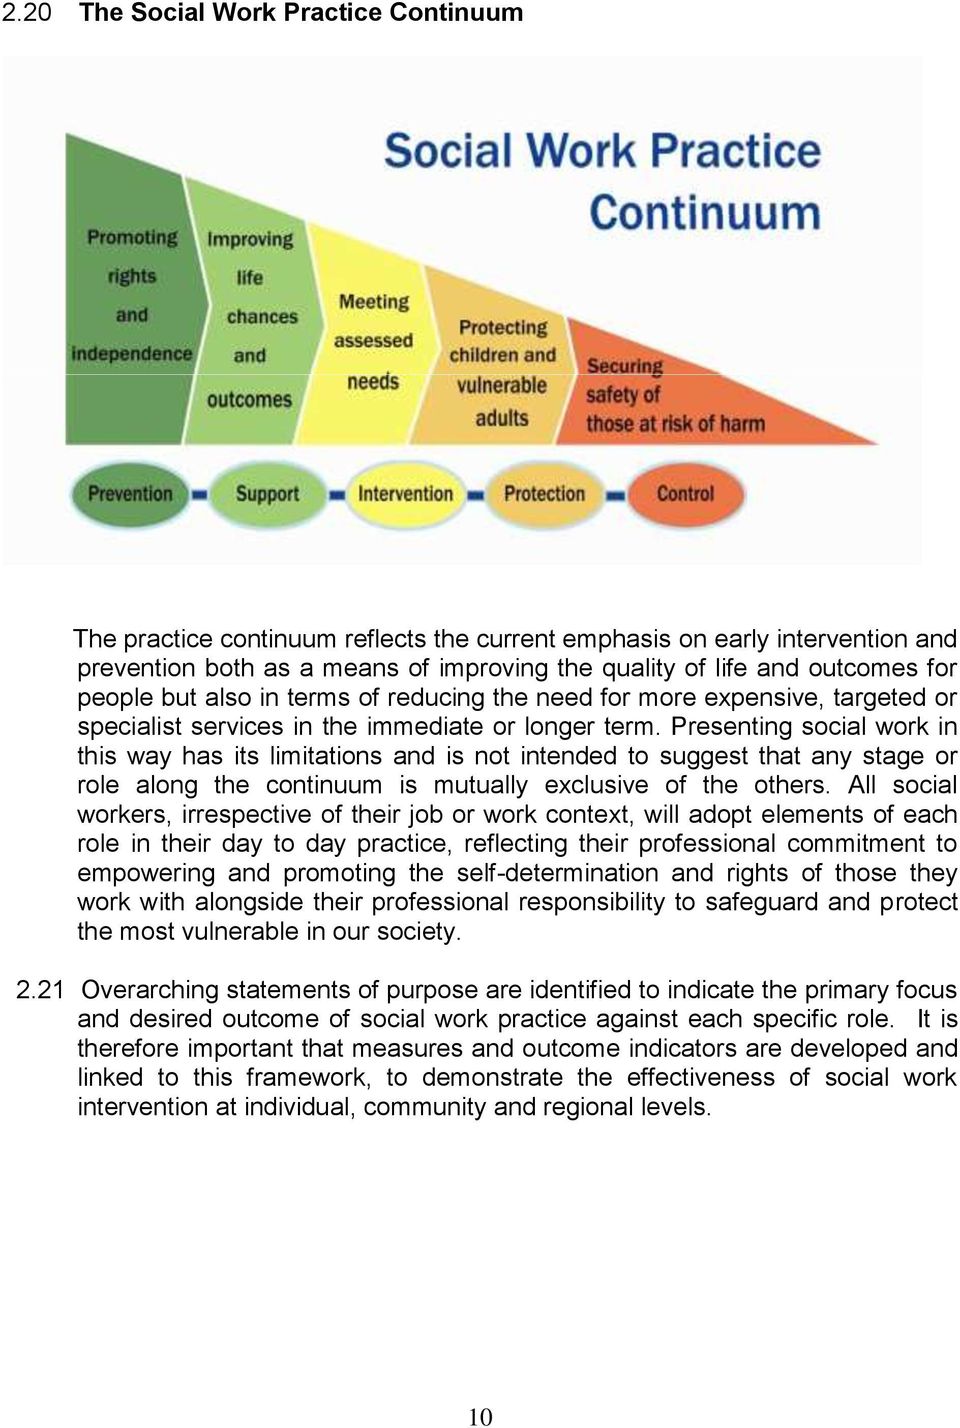 Presenting social work in this way has its limitations and is not intended to suggest that any stage or role along the continuum is mutually exclusive of the others.